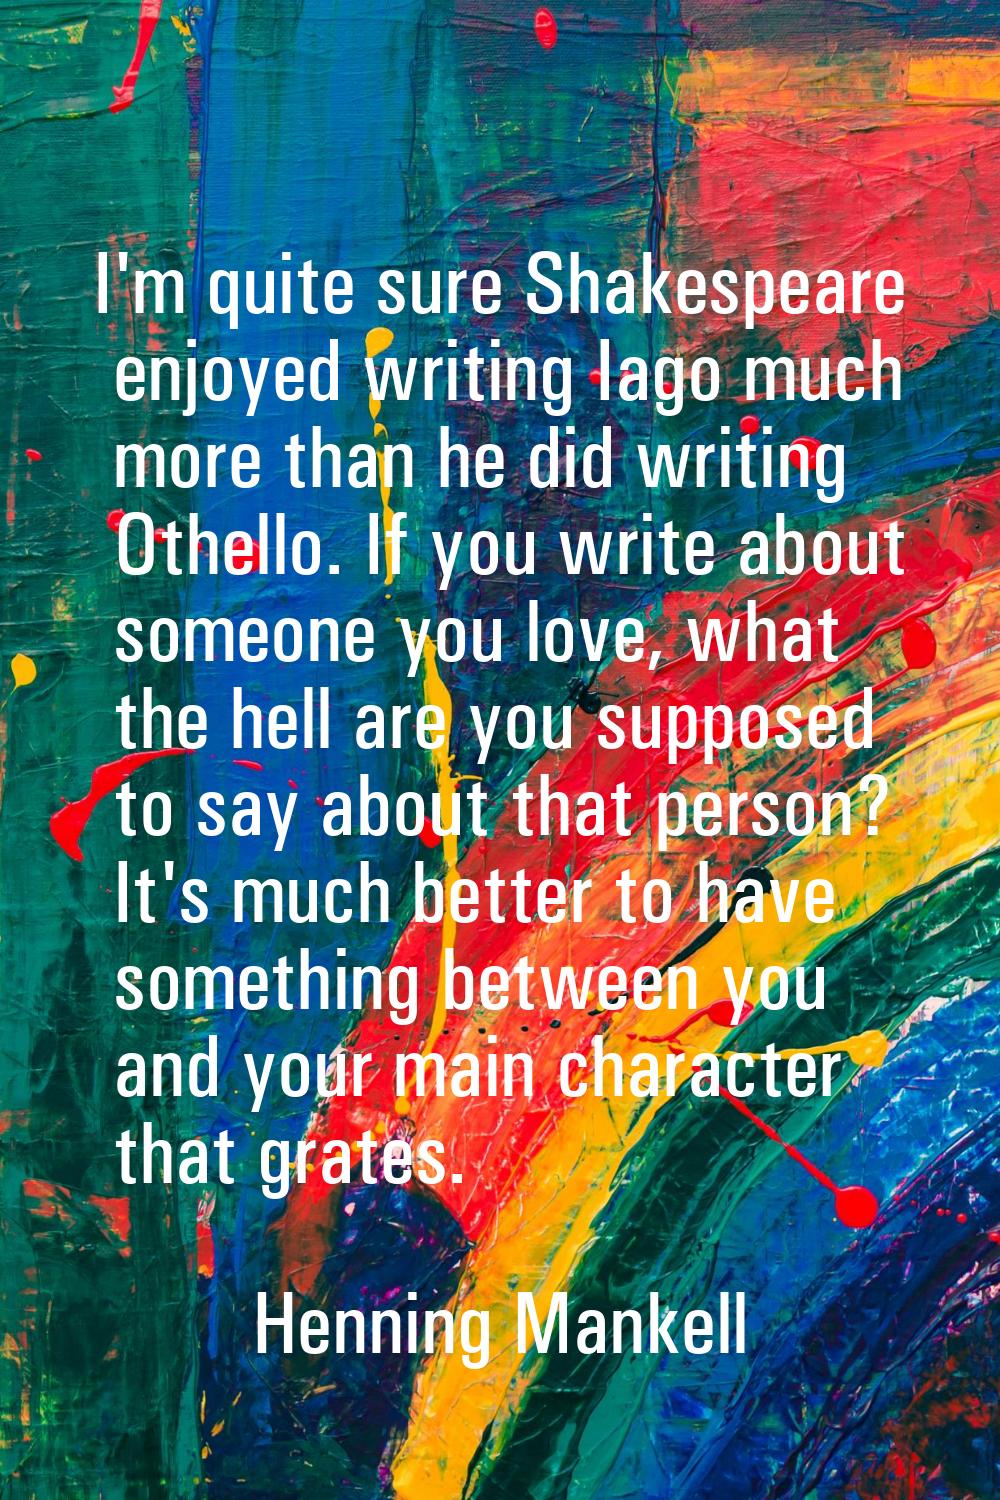 I'm quite sure Shakespeare enjoyed writing Iago much more than he did writing Othello. If you write